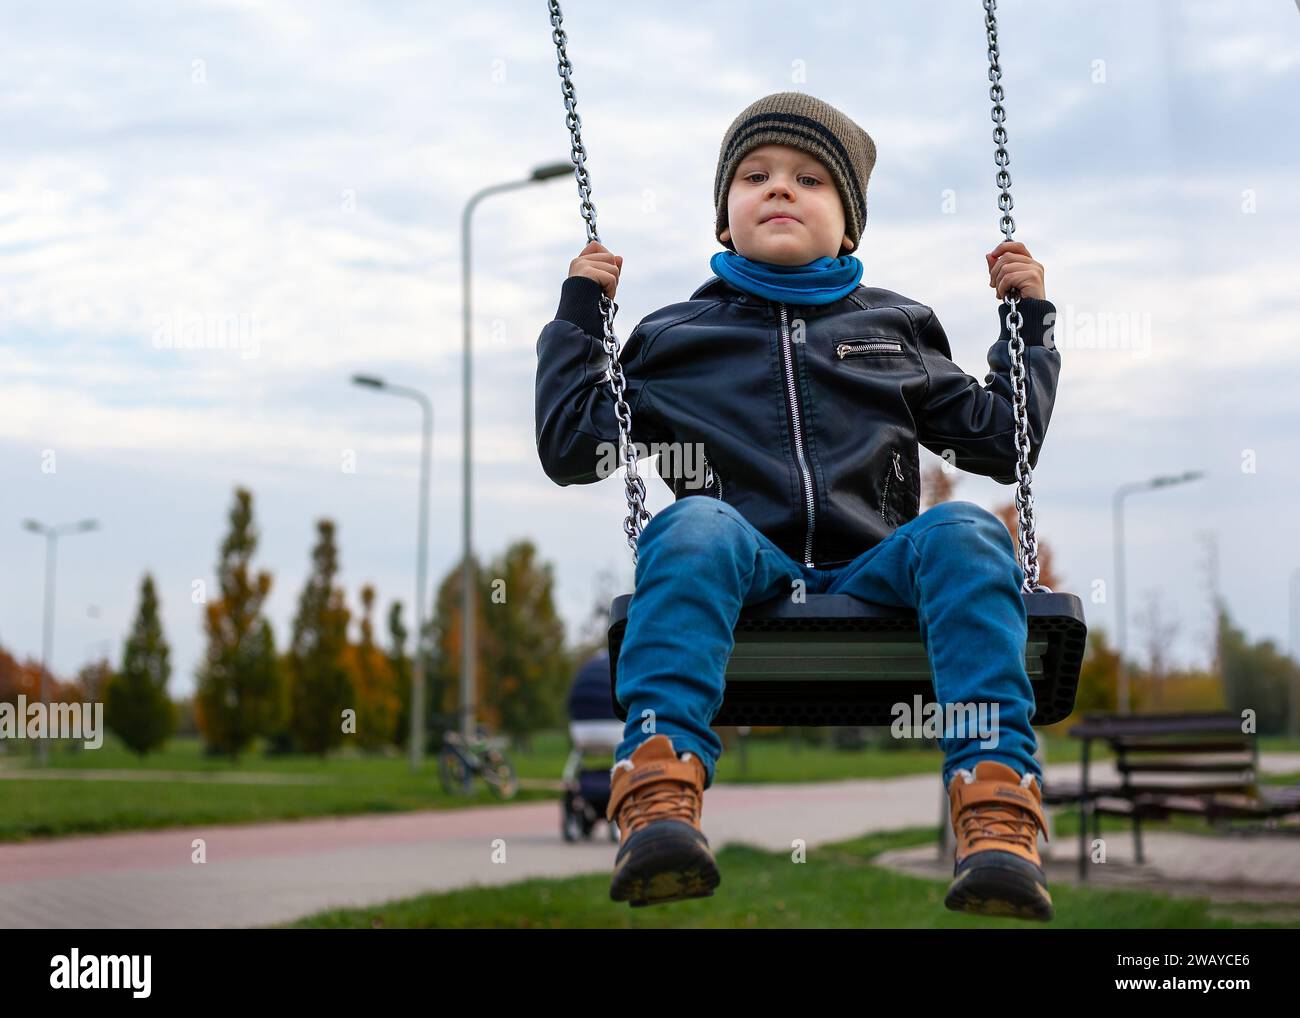 A little boy swings in a city park on a swing, he holds tightly to the metal chains. Stock Photo